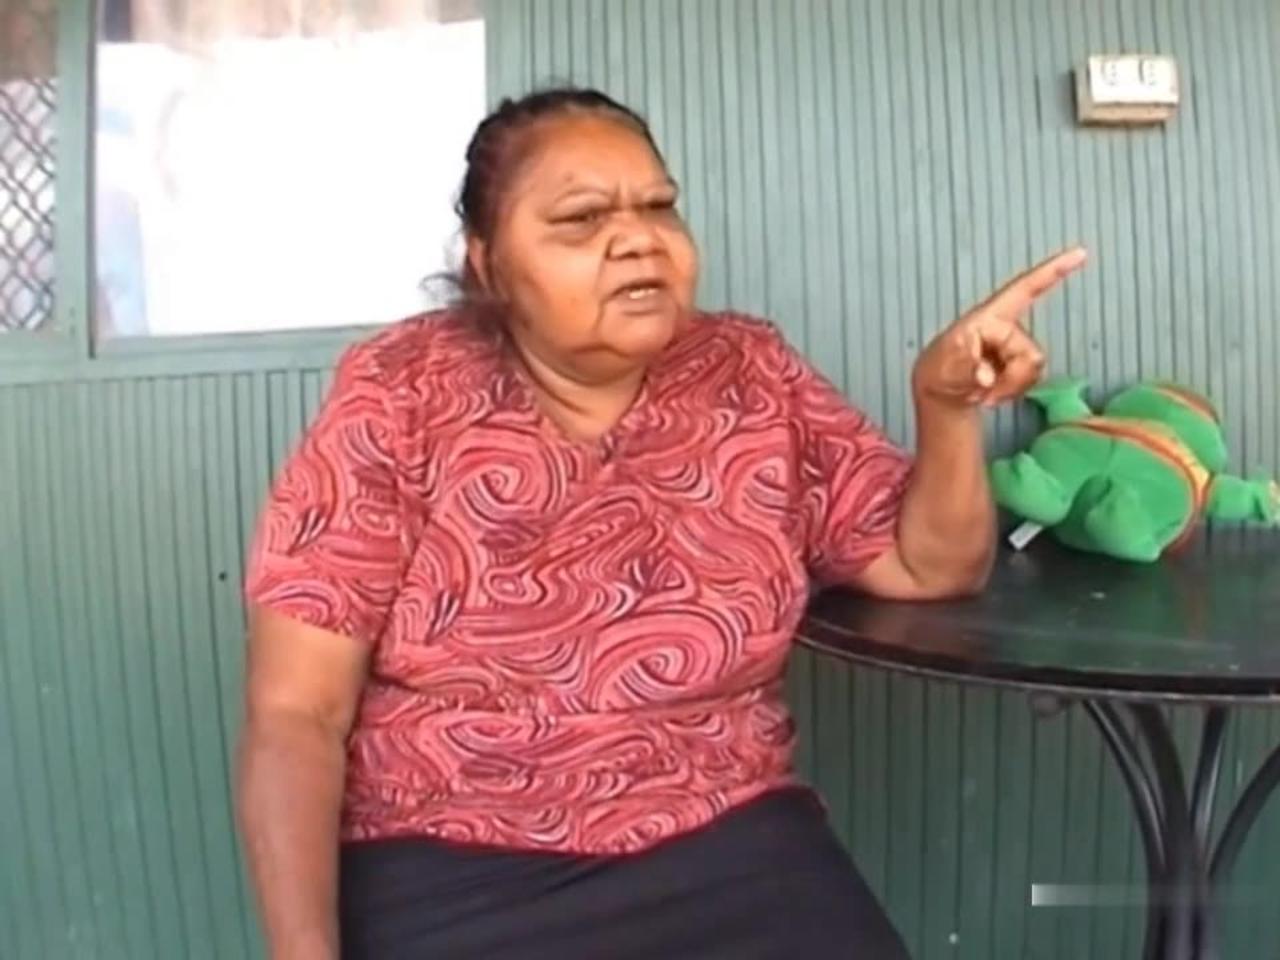 Aboriginal artist Marilyn Armstrong talks about her UFO encounters in Alice Springs, Australia